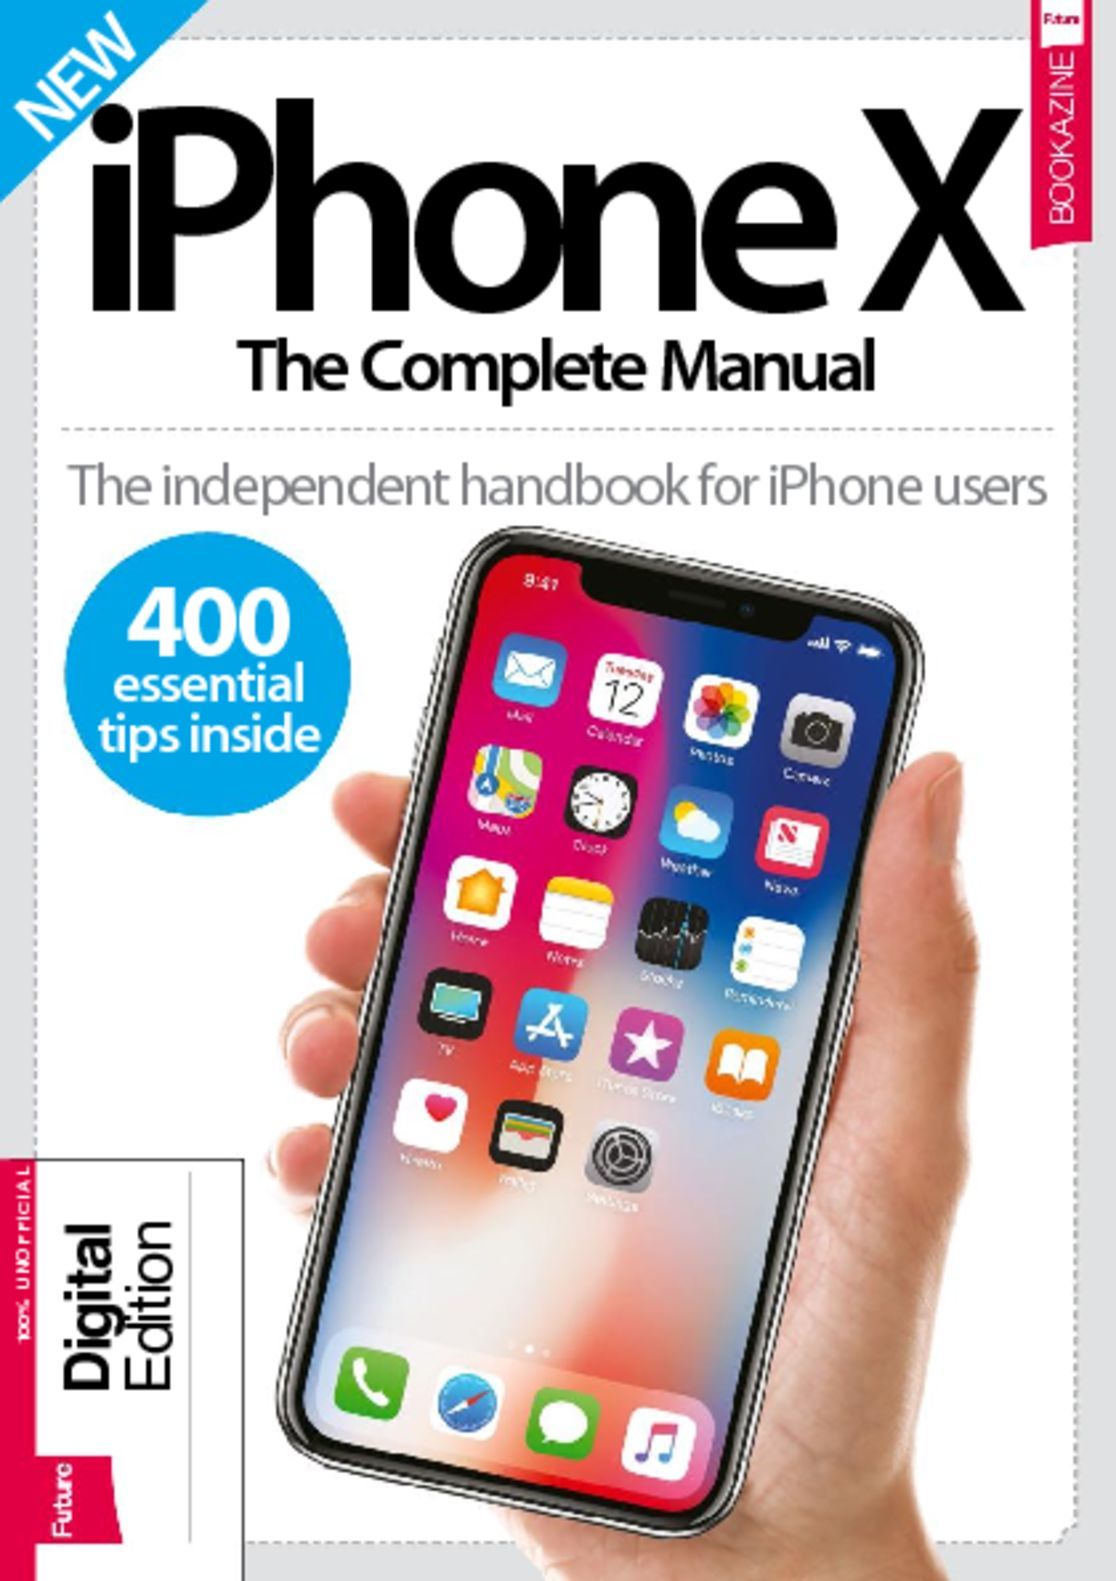  iPhone  X  The Complete Manual Magazine  Digital 